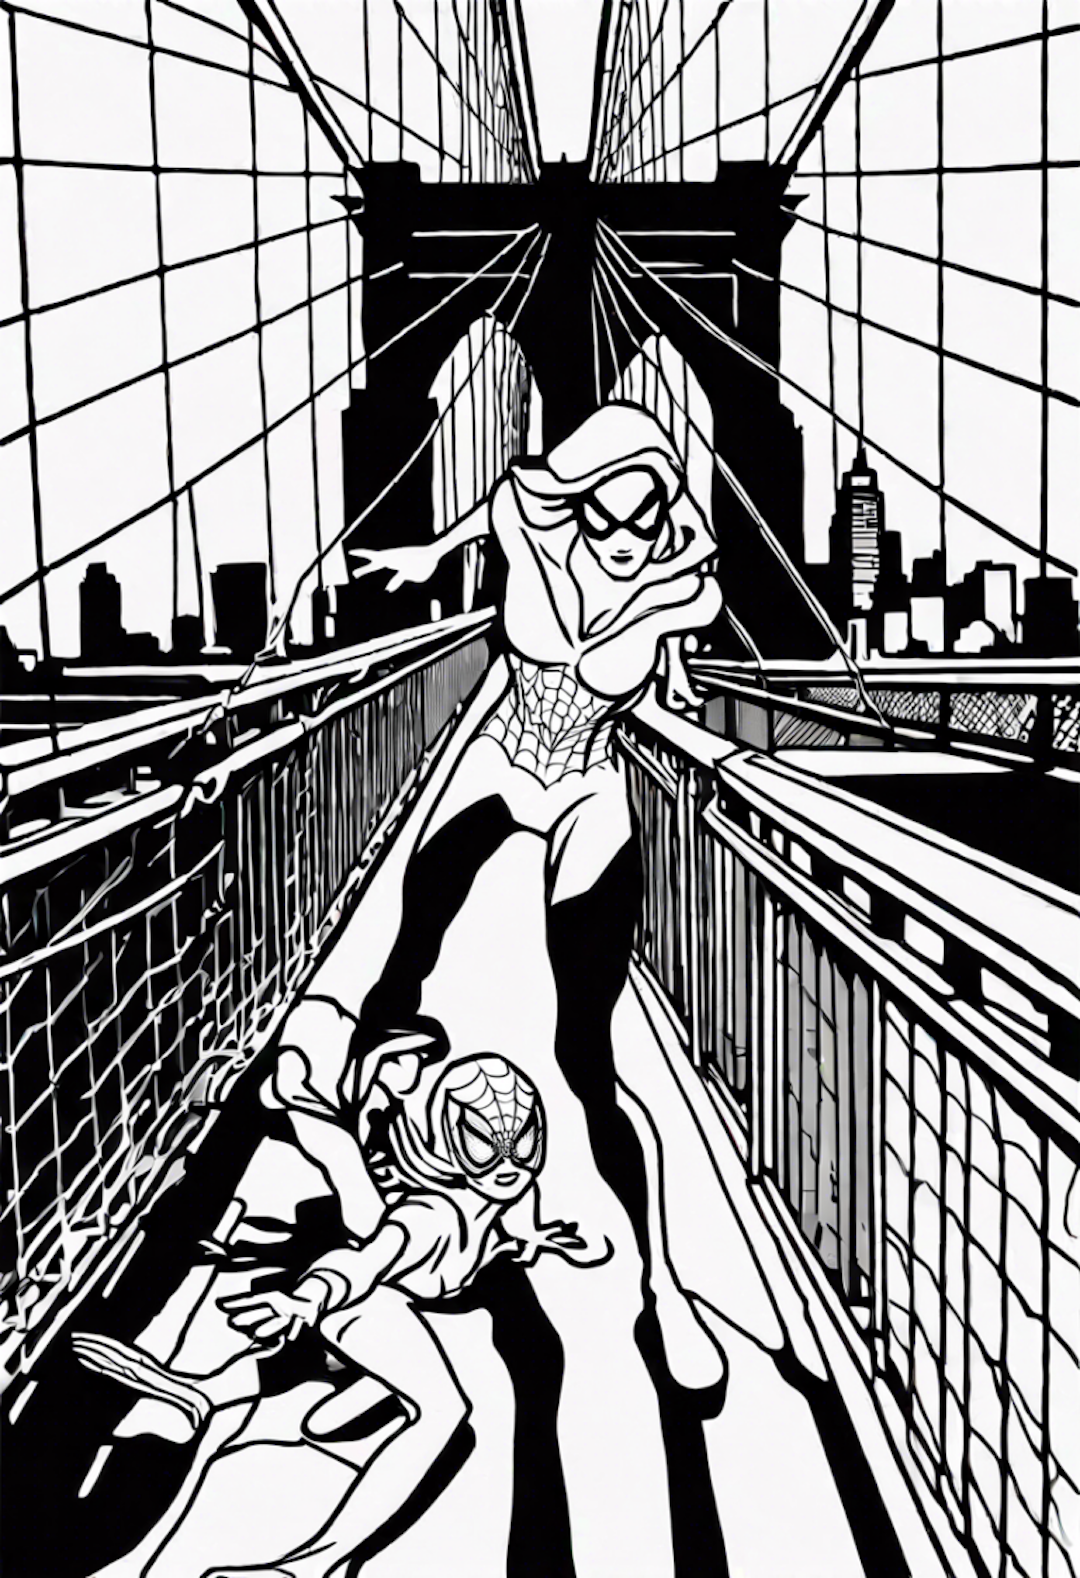 Spiderman Saving Mary Jane At The Brooklyn Bridge coloring pages